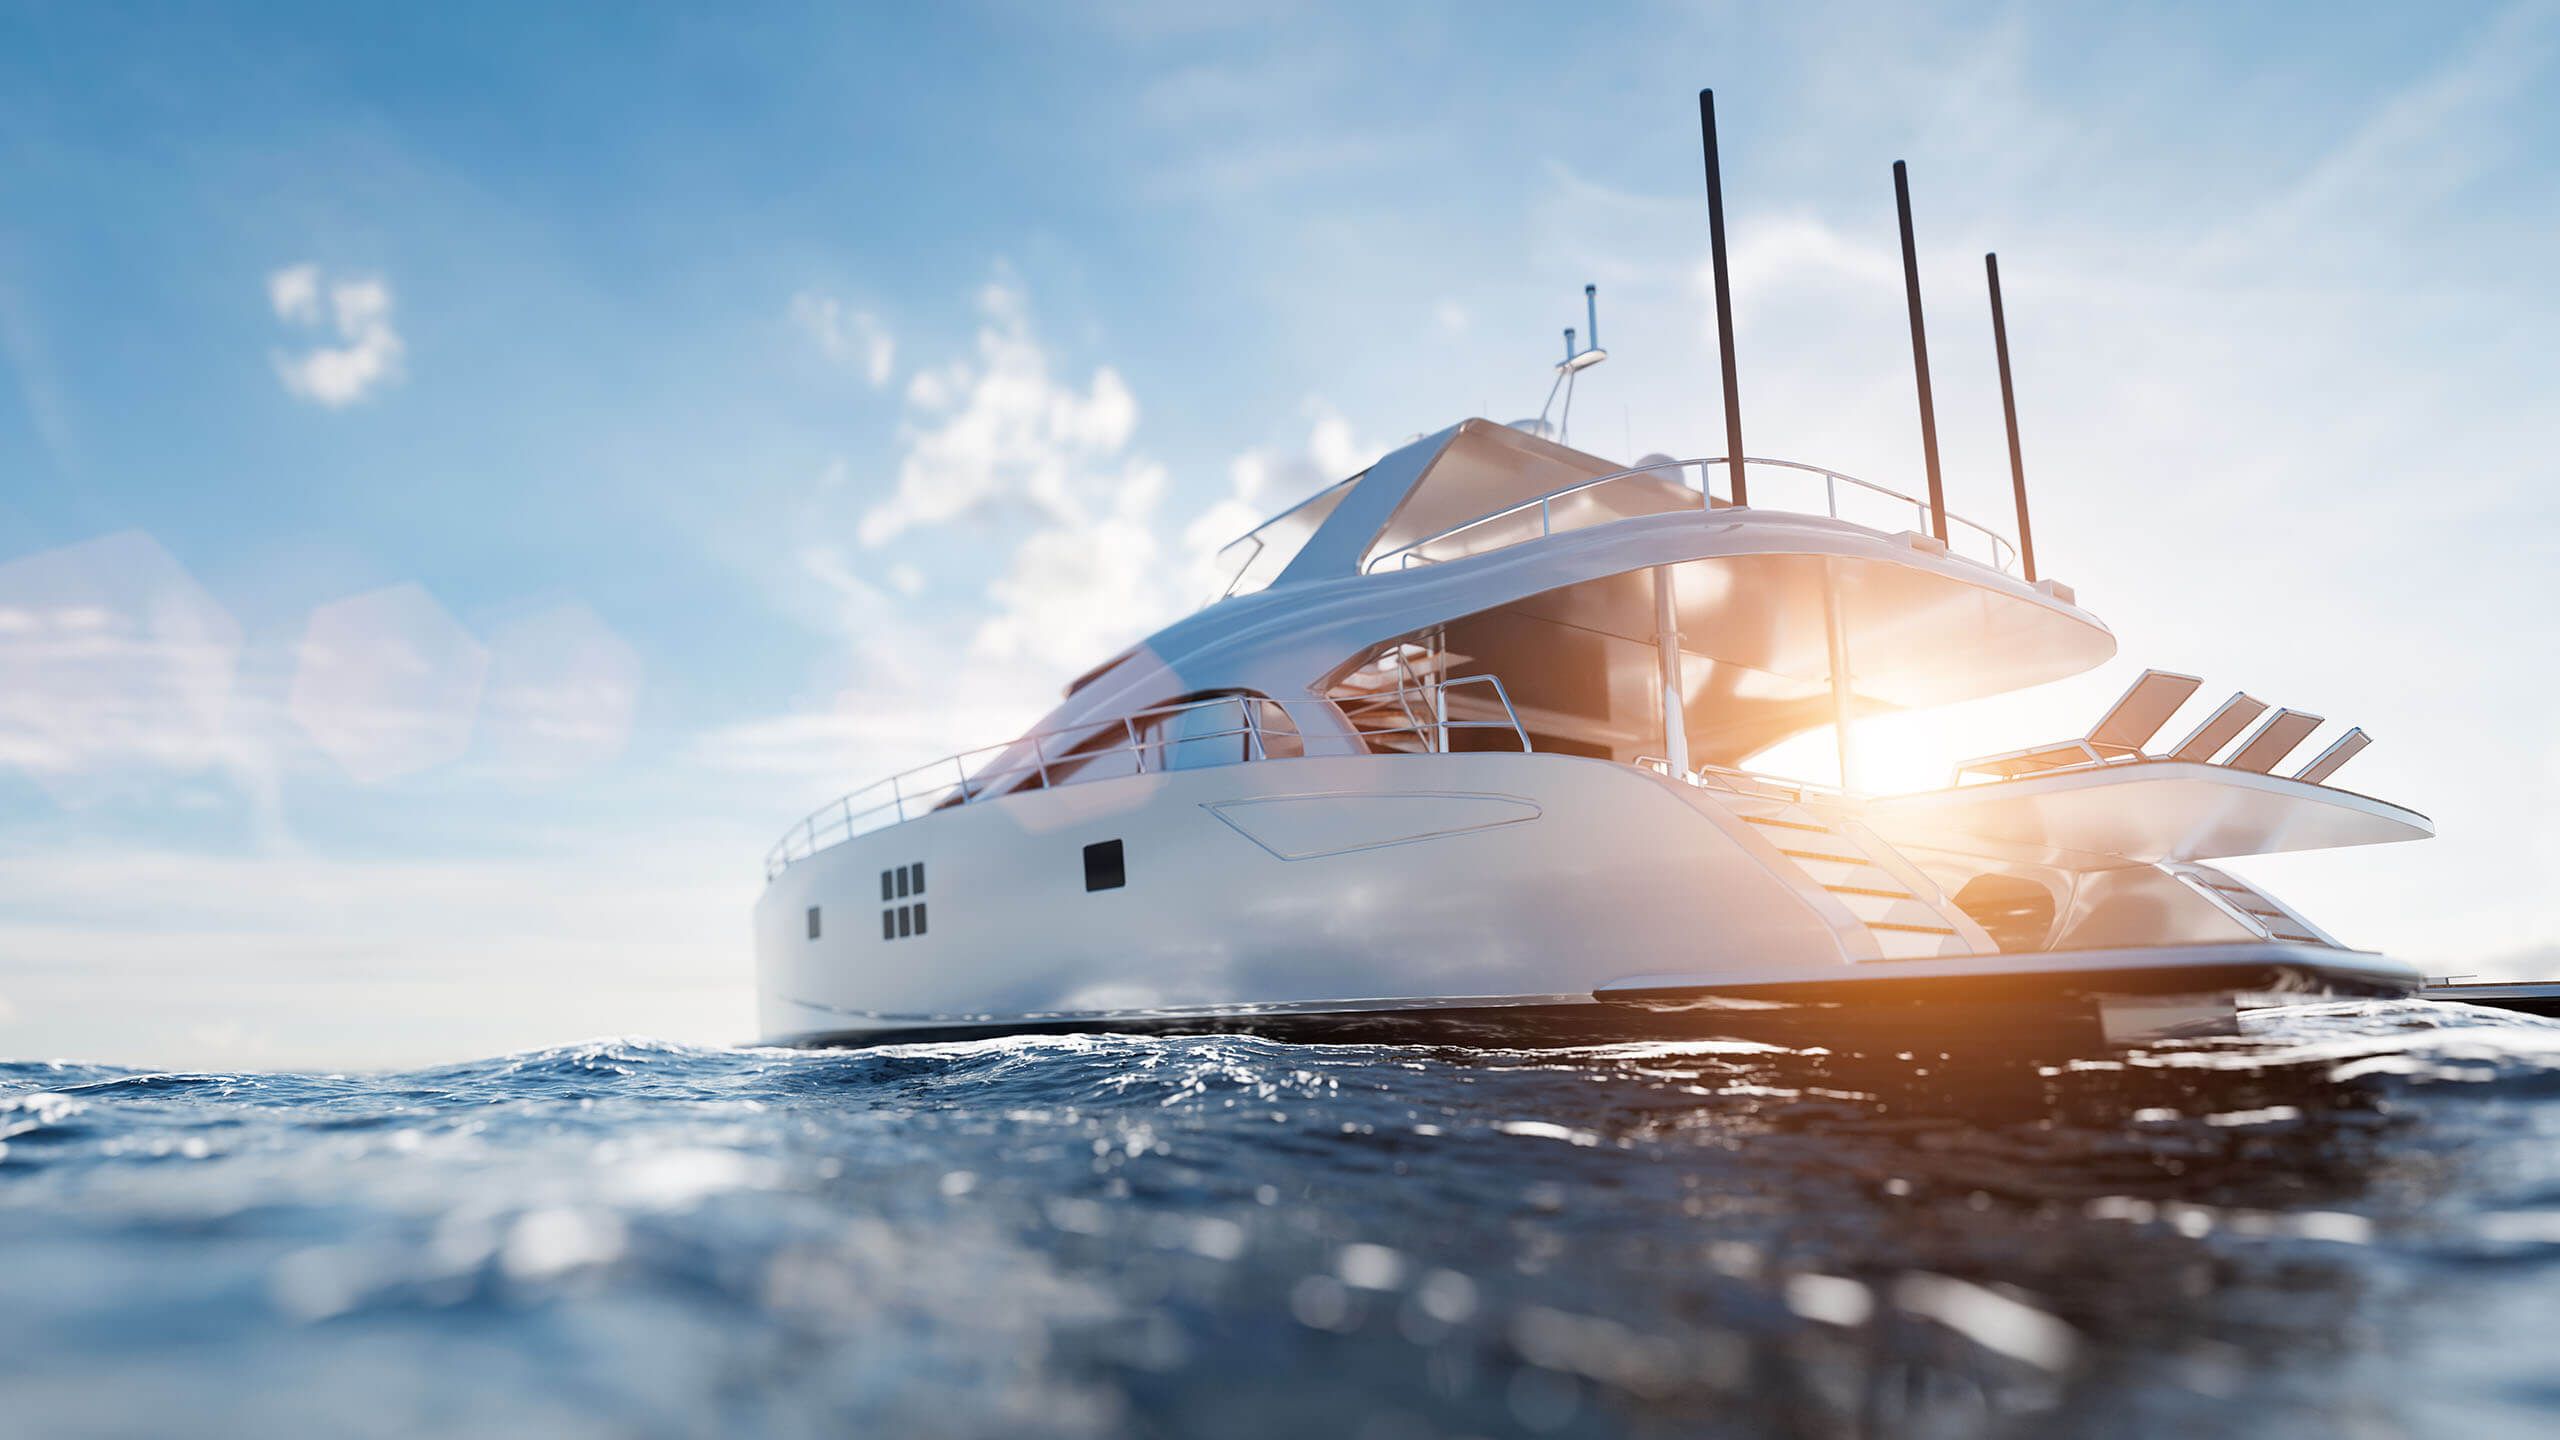 Luxury yacht on the open ocean with sunrise in the background and blue skies and crisp, ocean water